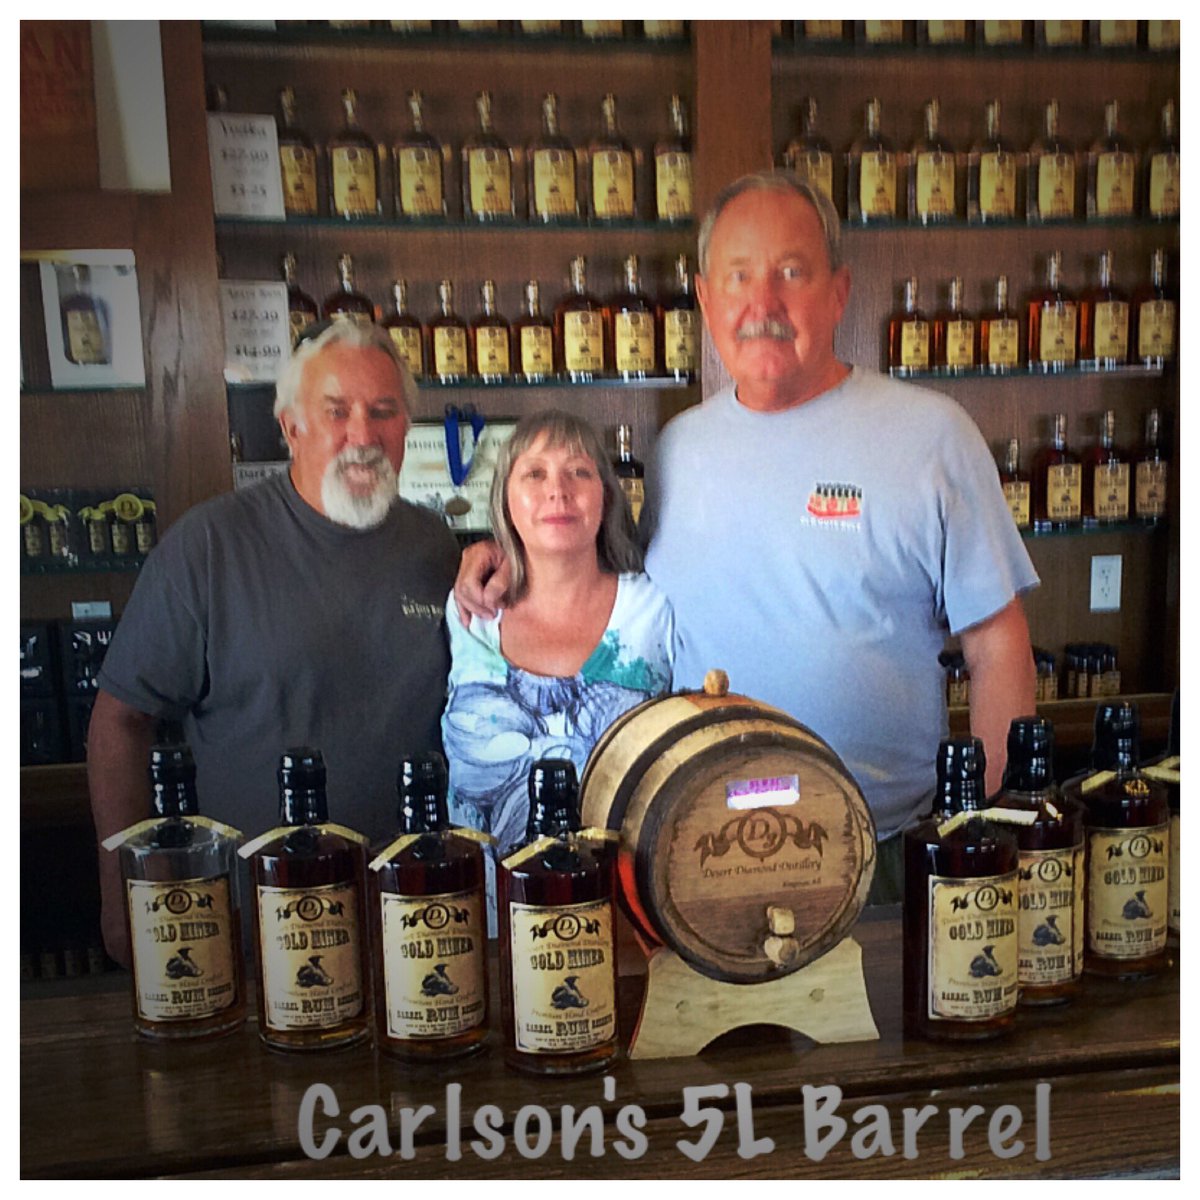 The Carlson's finished bottling their 5L Barrel this past weekend! The Barrel aged for 7 months & made 7 bottles!